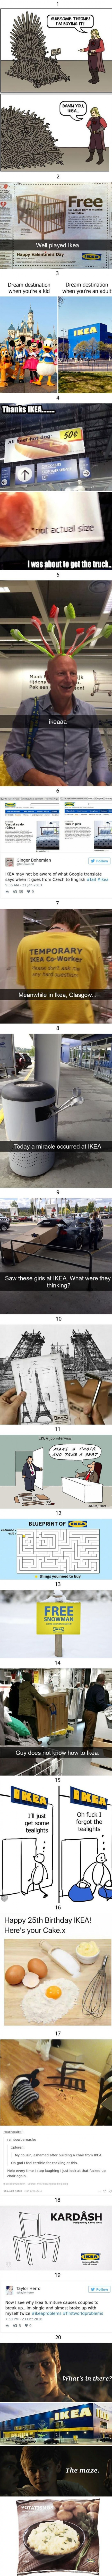 Ikea's The Best